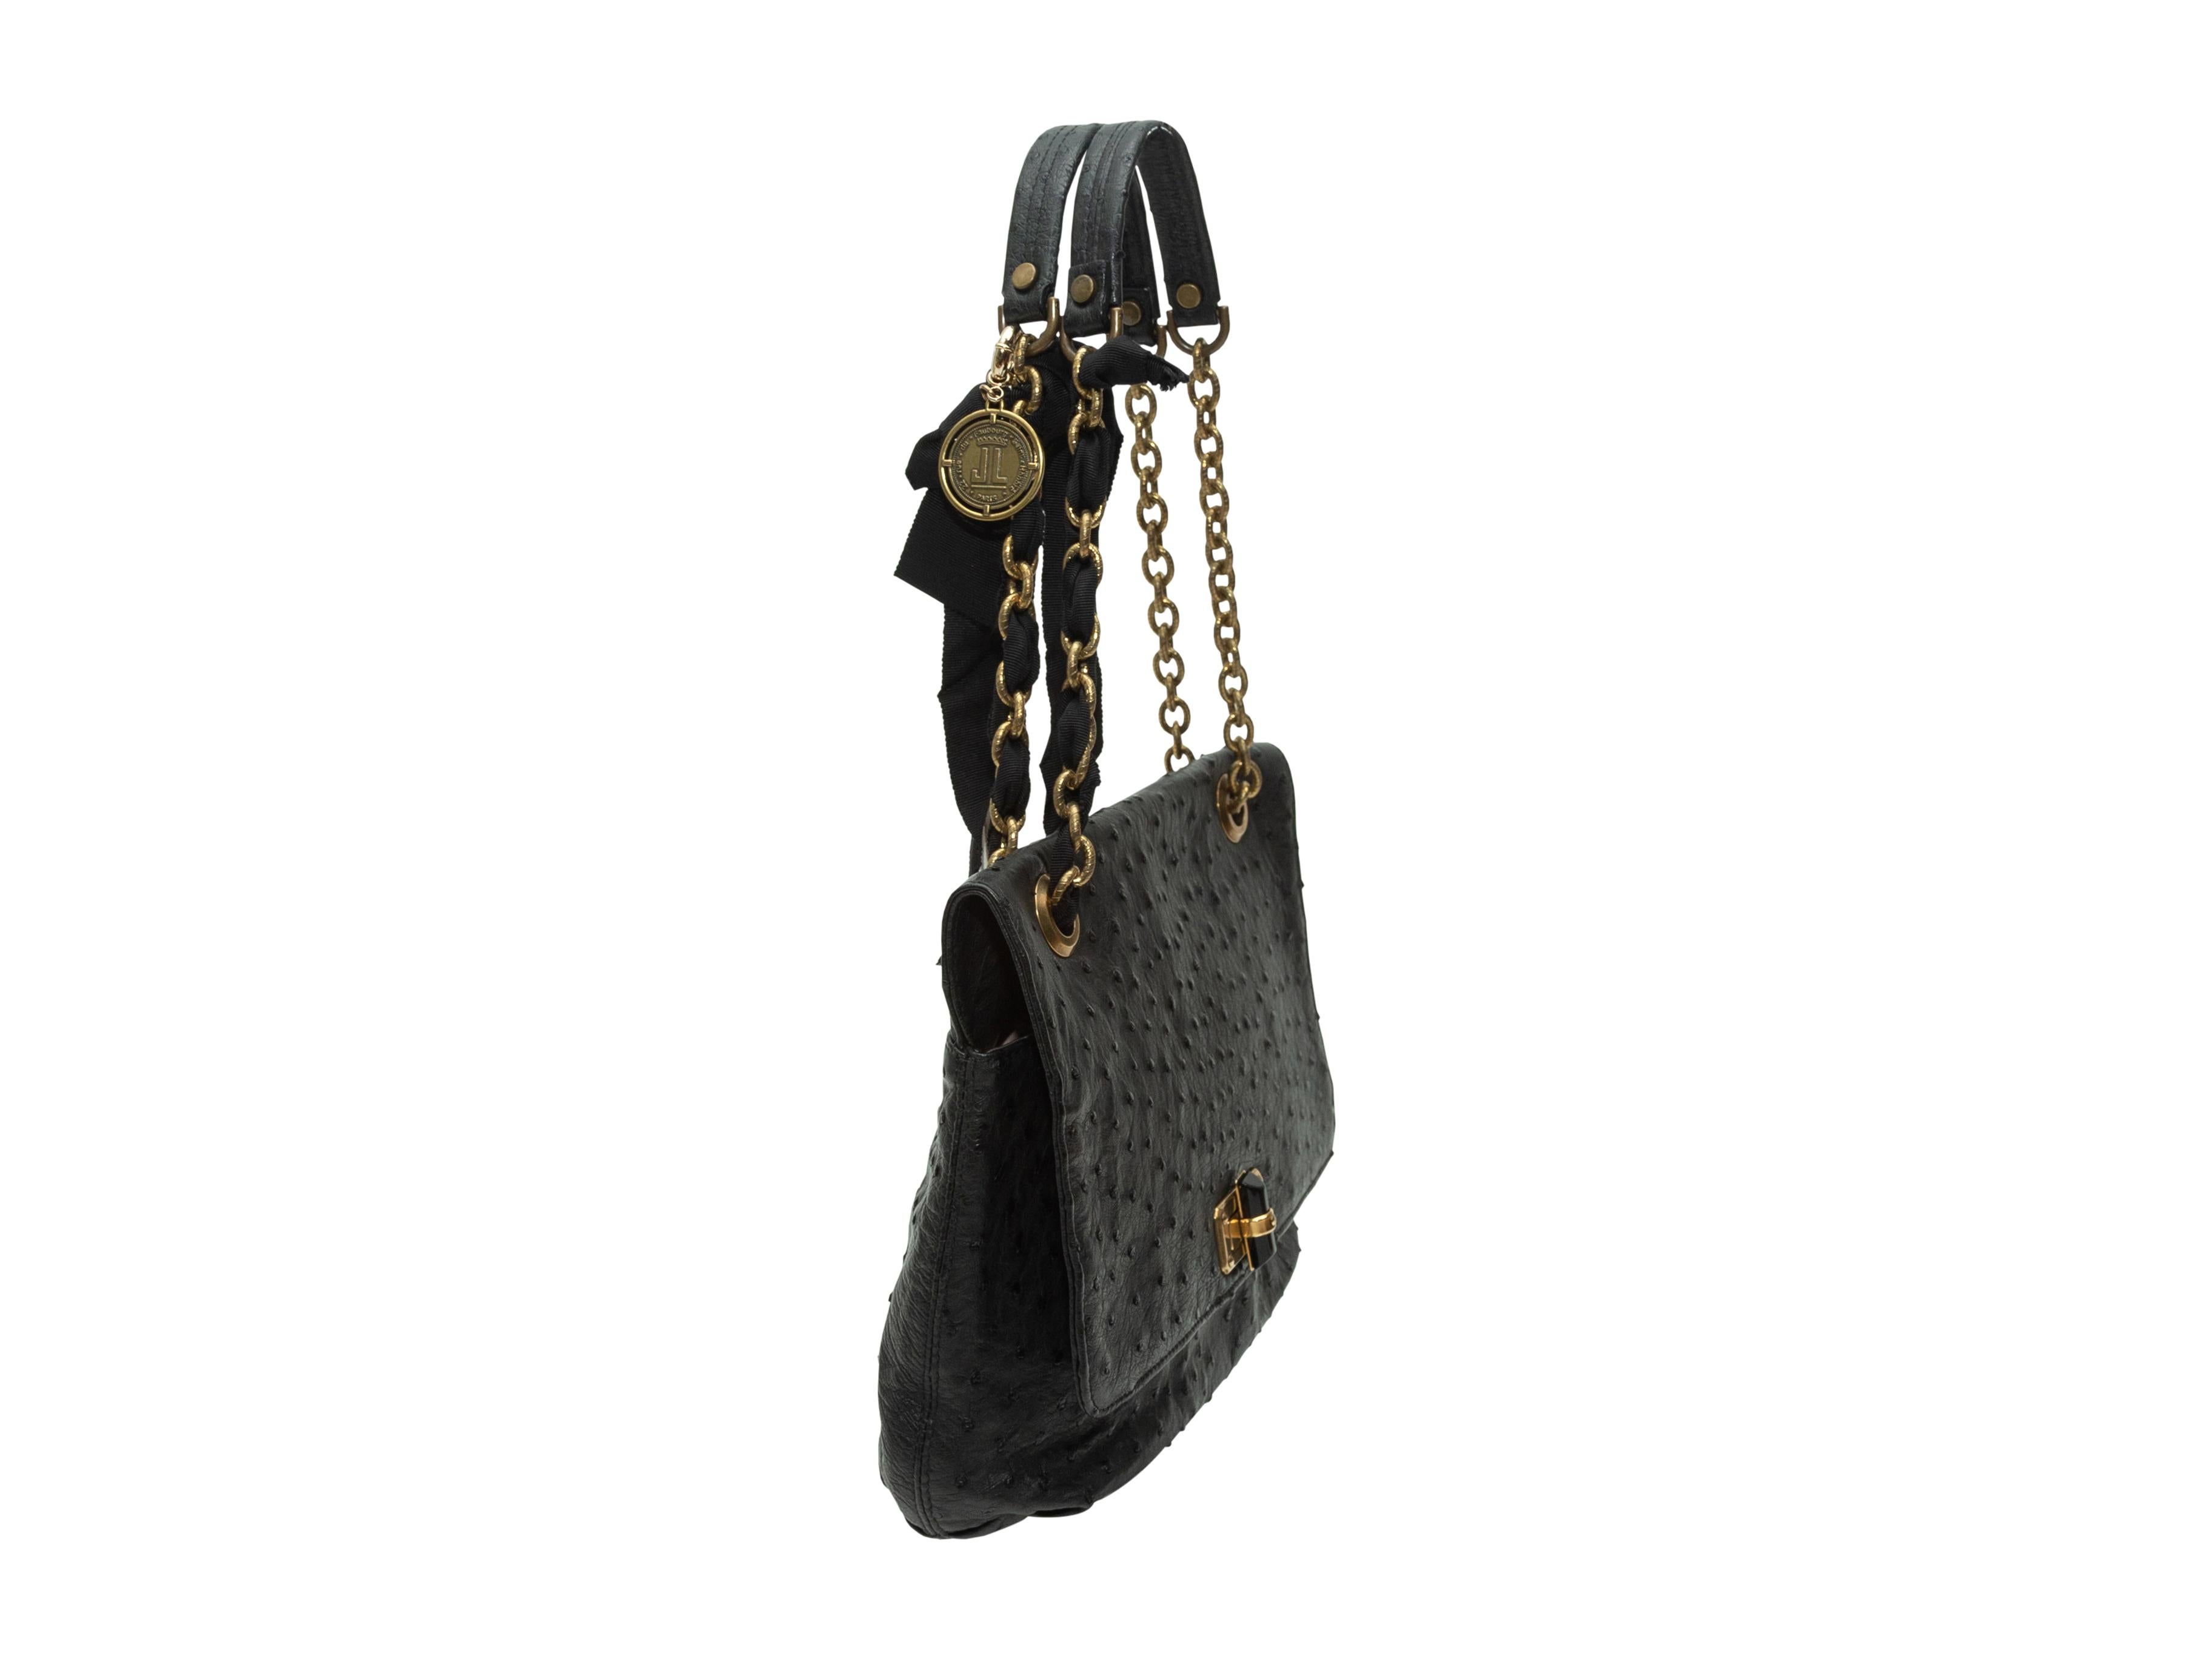 Product Details: Black ostrich leather shoulder bag by Lanvin. Gold-tone hardware. Grosgrain accent at chain-link and leather strap. Interior zip pocket. Turn-lock closure at front flap. 12